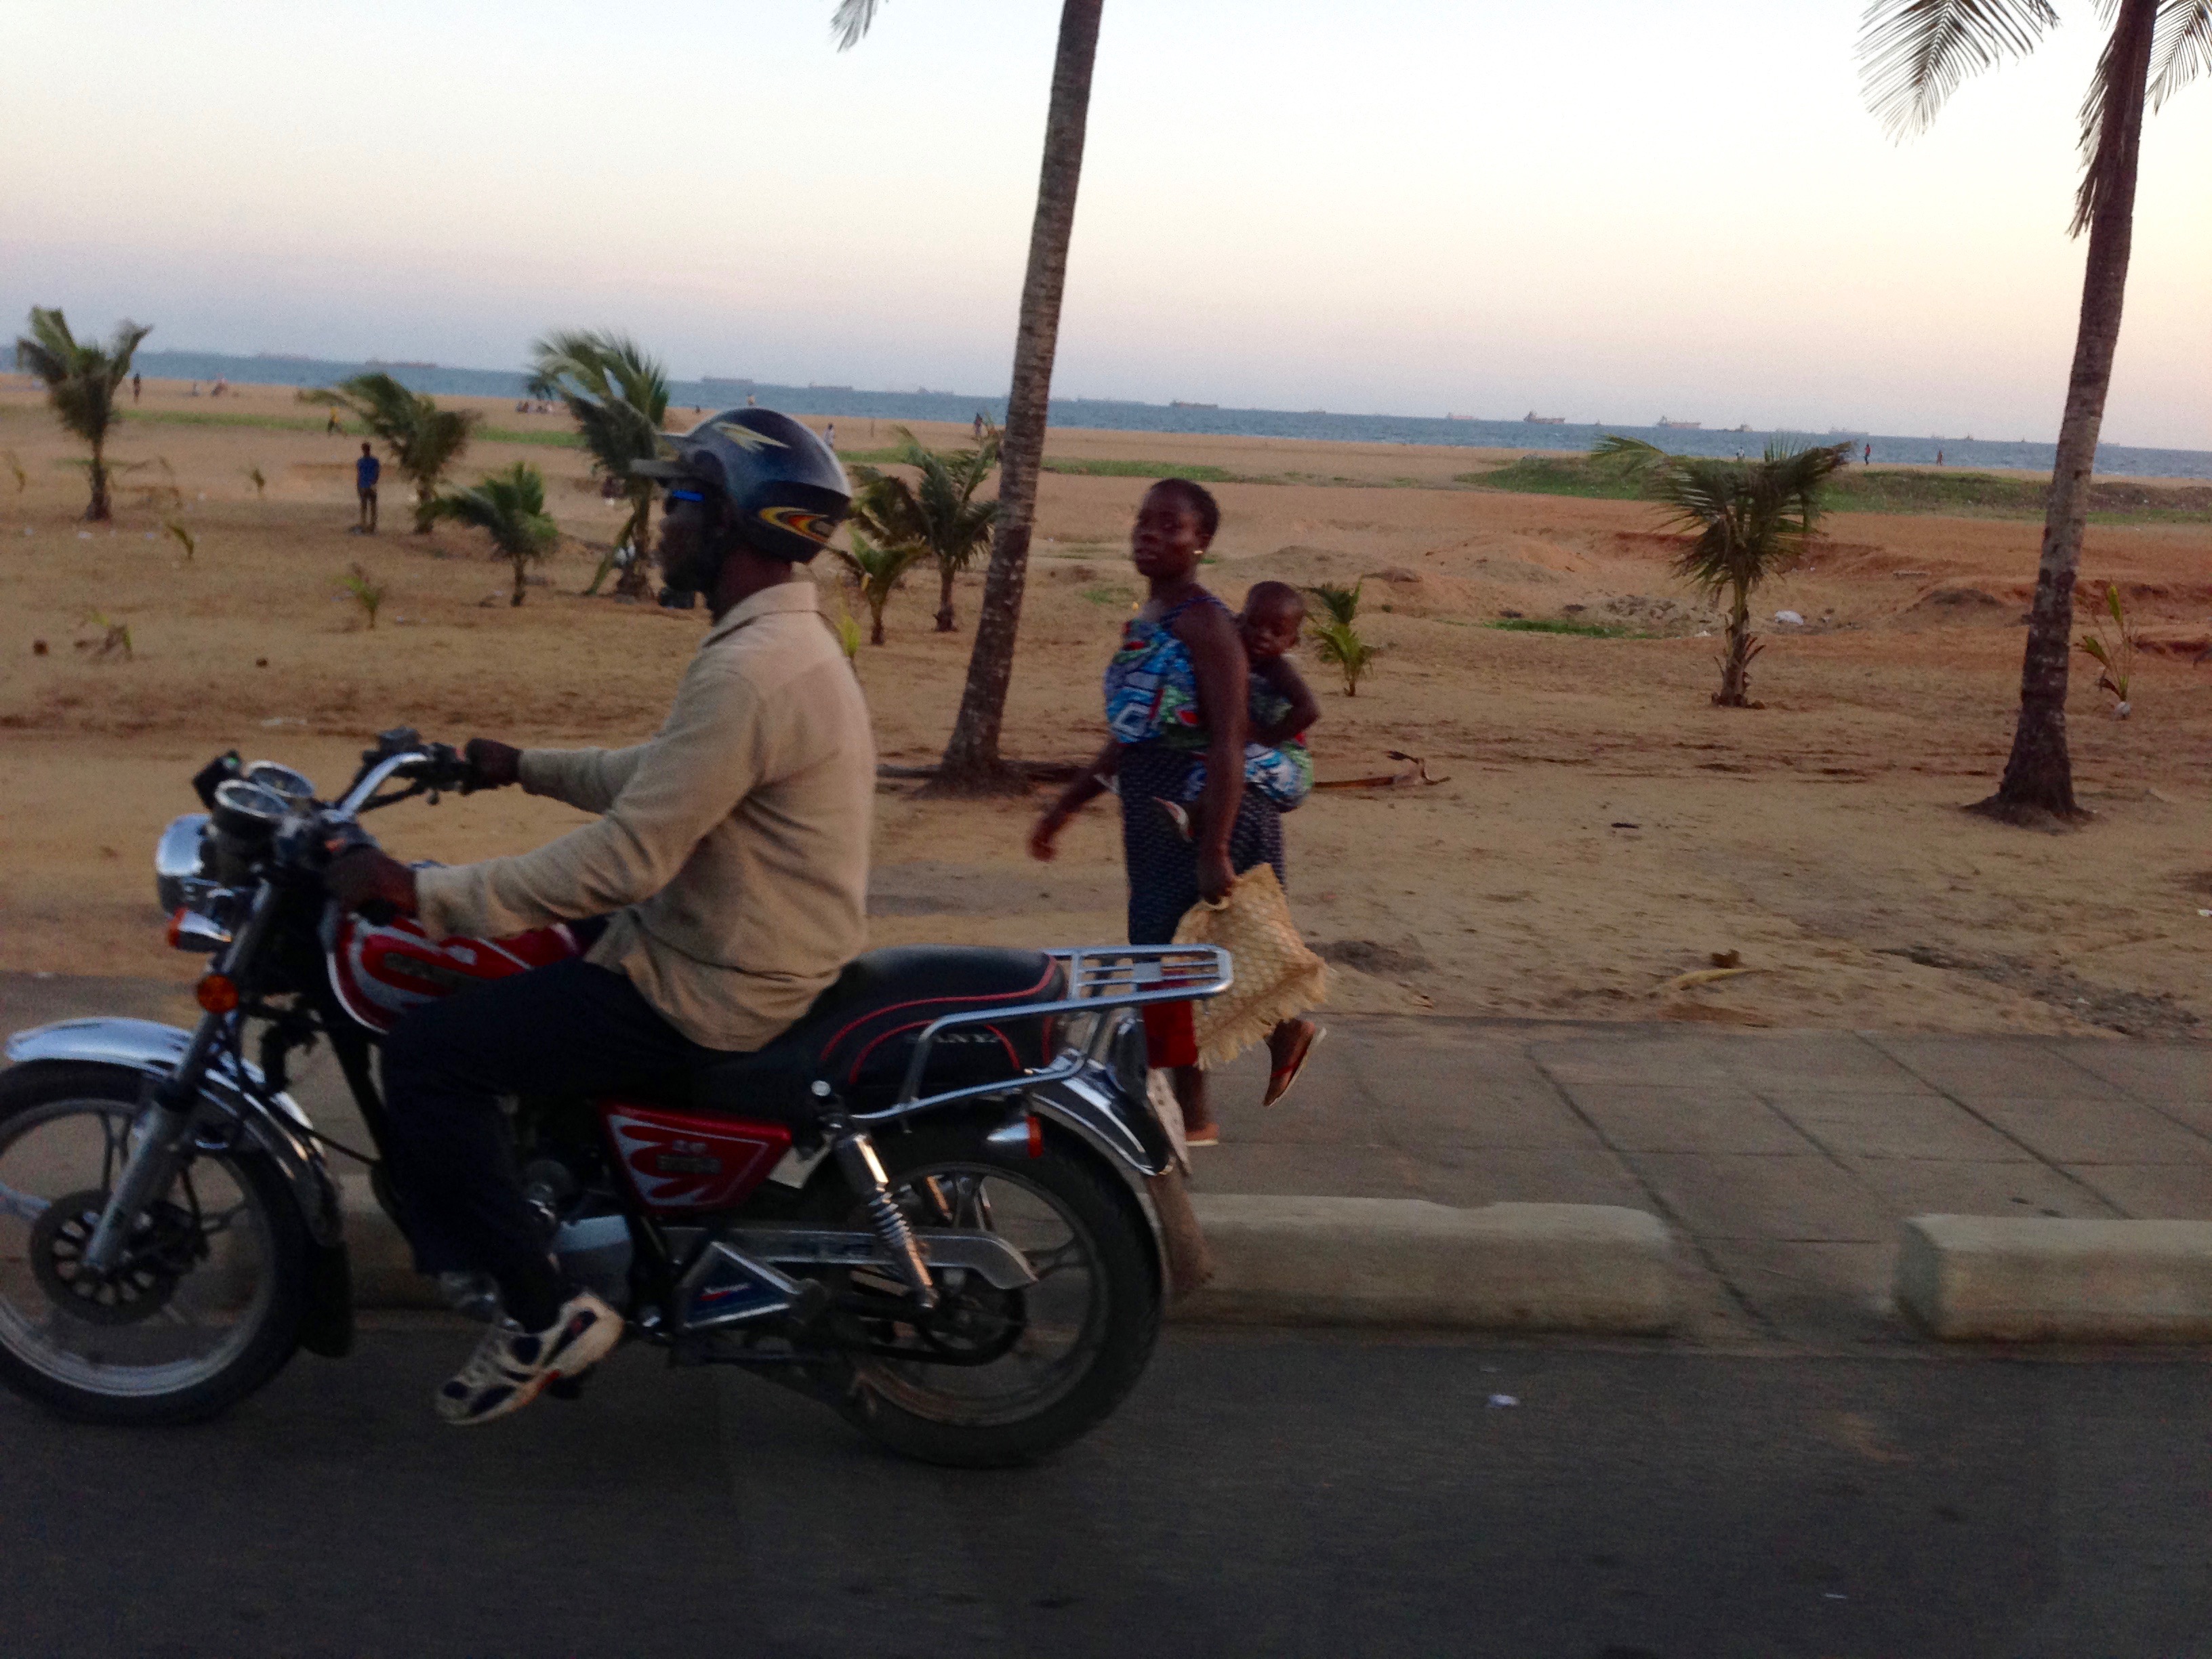 Motorcycling in Lome, Togo. #JujuFilms